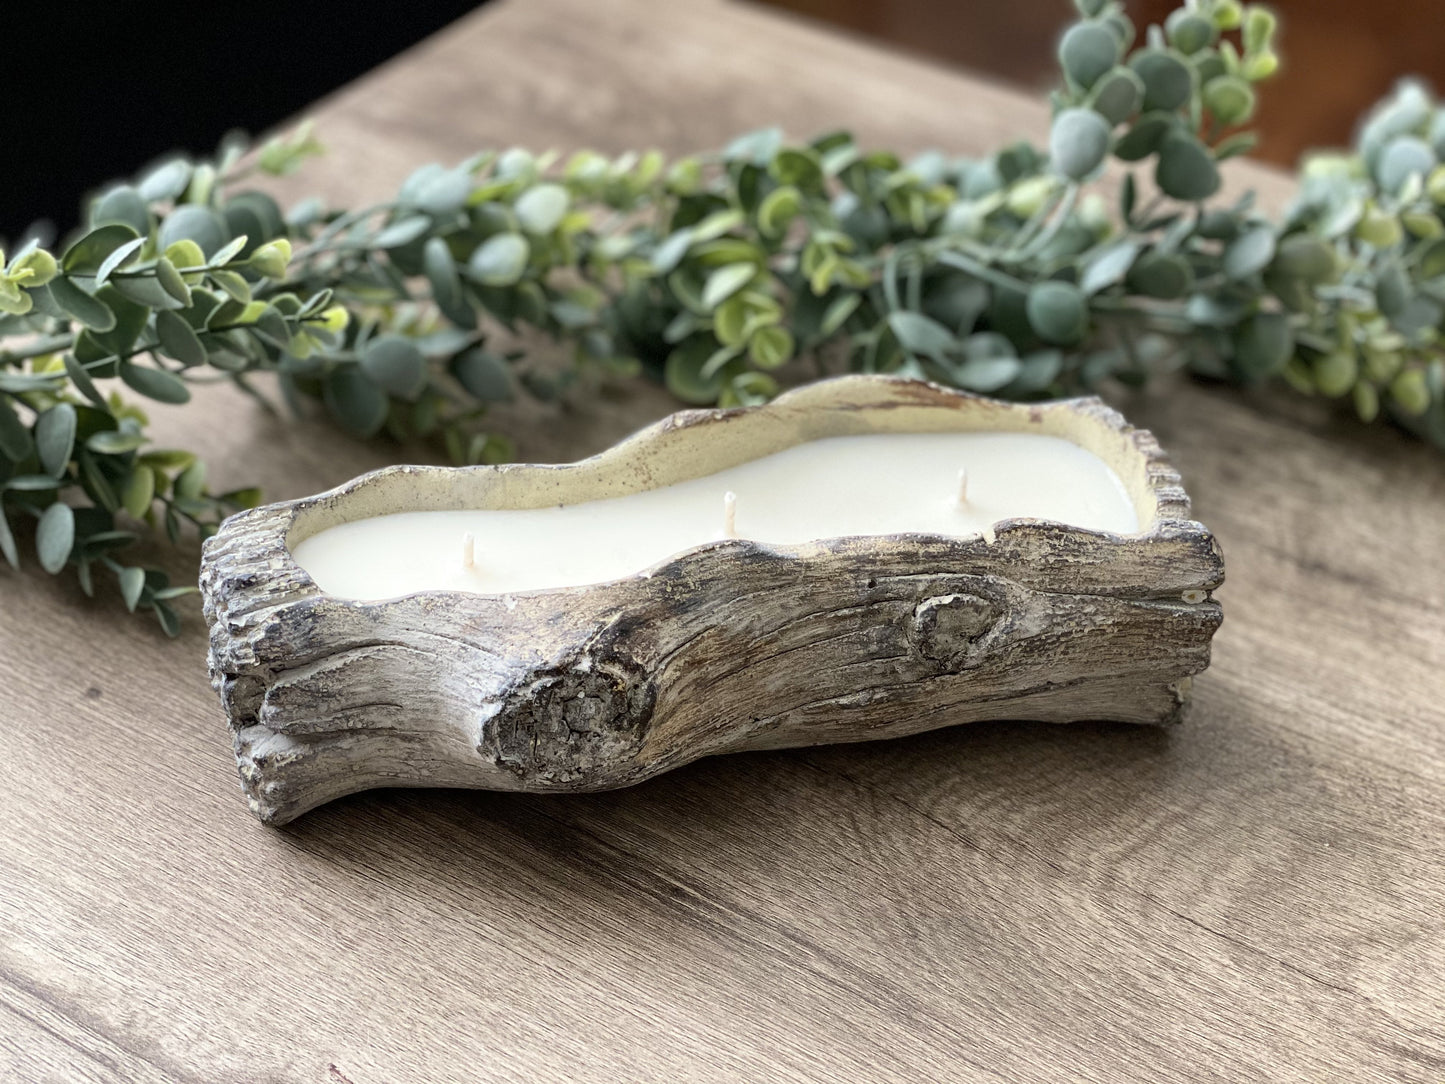 Cement Tree Log Decor Candle | Sandbar | 12 oz. A unique piece of home decor that works perfectly for indoor and outdoor space. When you finished the candle, this cement log can be used as planter, serving dish and decorative holder. Bluffton Candles - The Bluffton Shop - Gift Shops